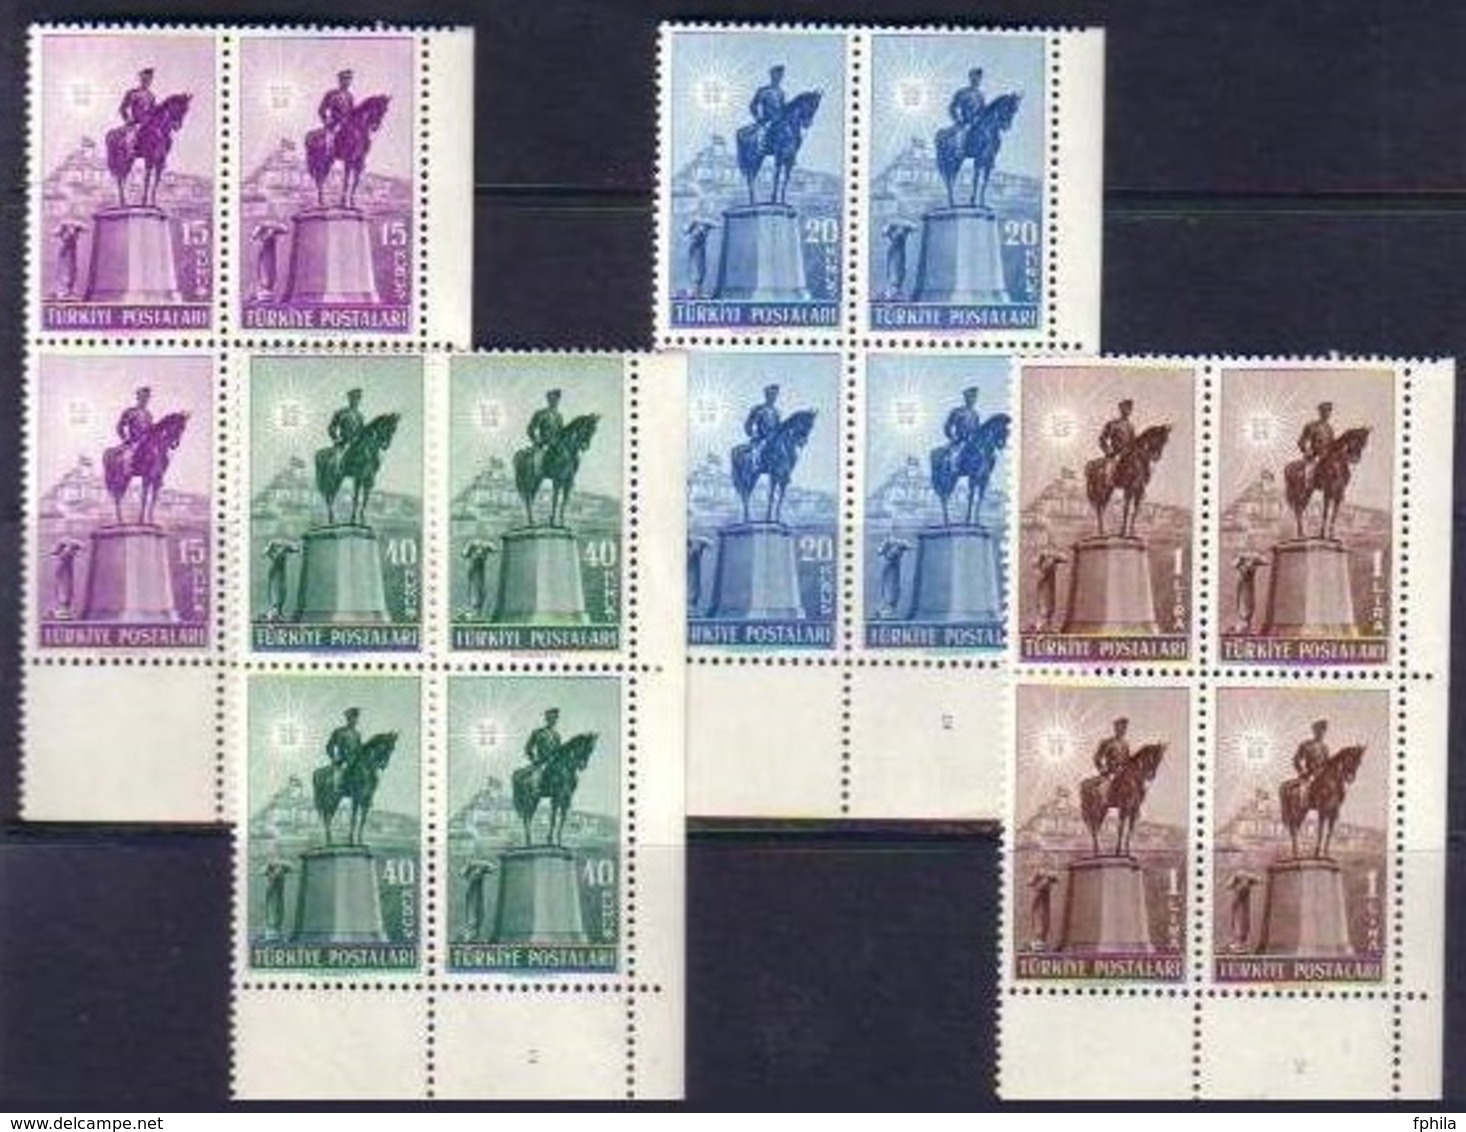 1948 TURKEY THE 25TH ANNIVERSARY OF THE REPUBLIC OF TURKEY BLOCK OF 4 MNH ** - Unused Stamps